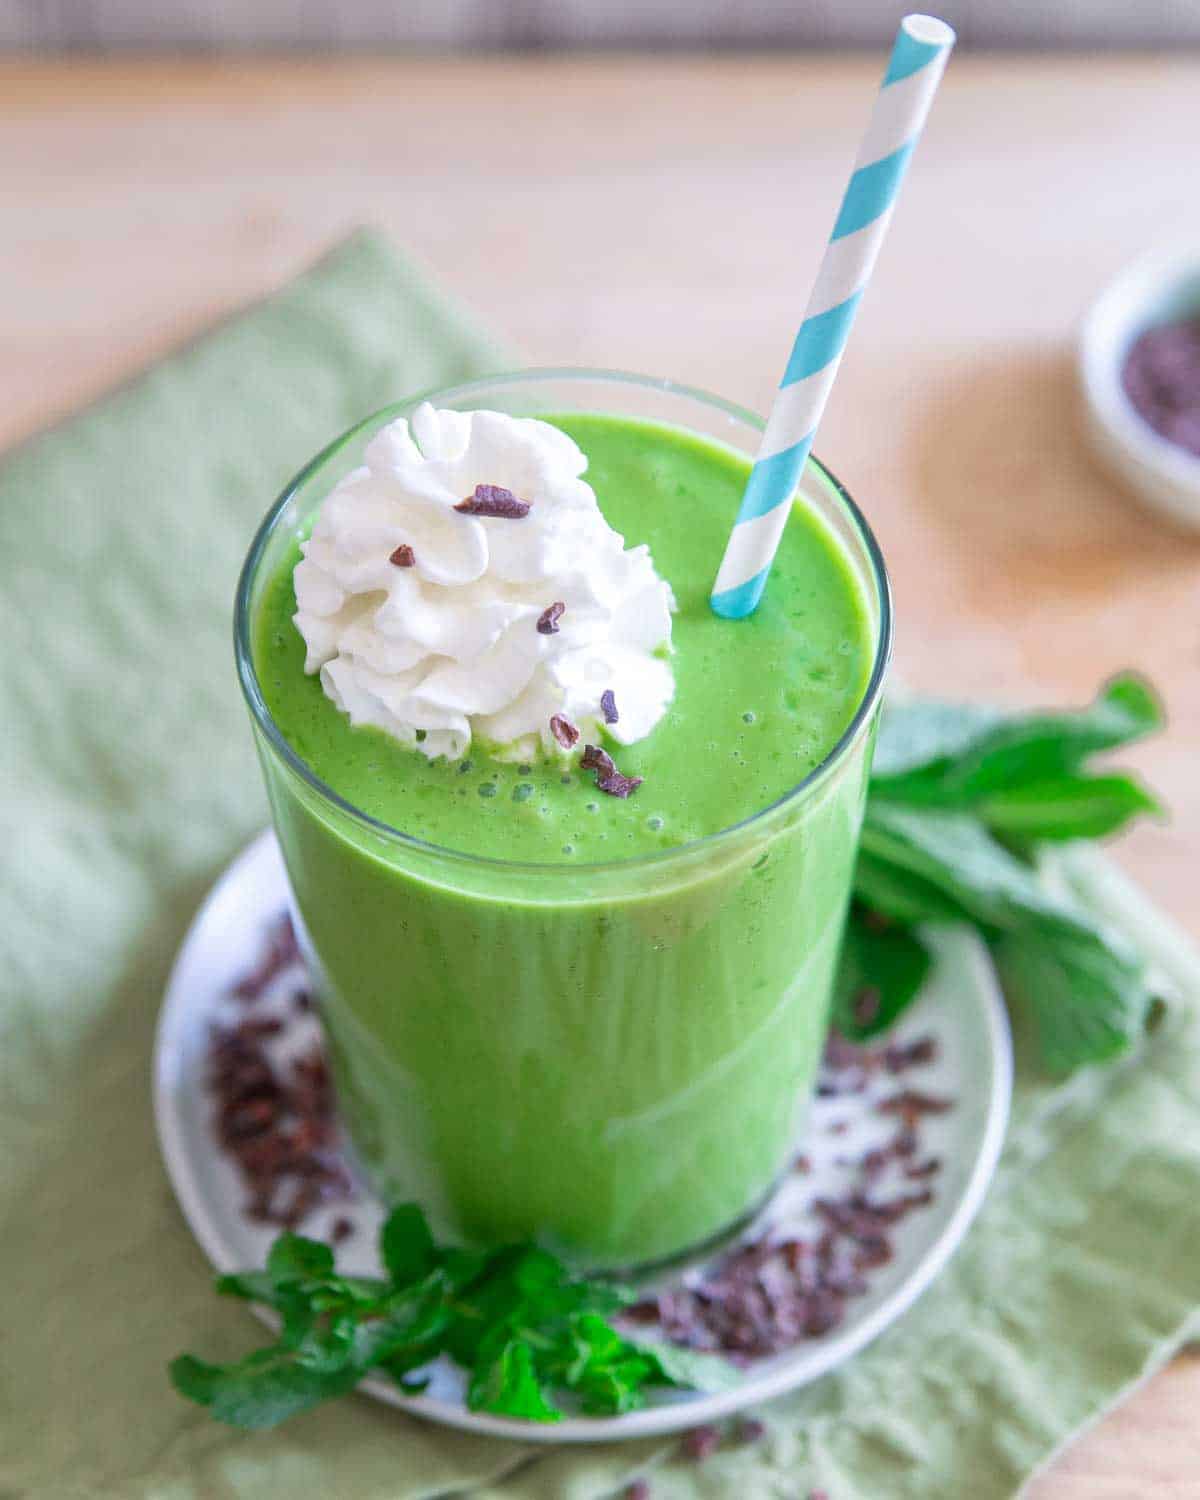 This Shamrock shake copycat recipe is a healthy, all real ingredient version of McDonald's shamrock shake you can feel much better about drinking!